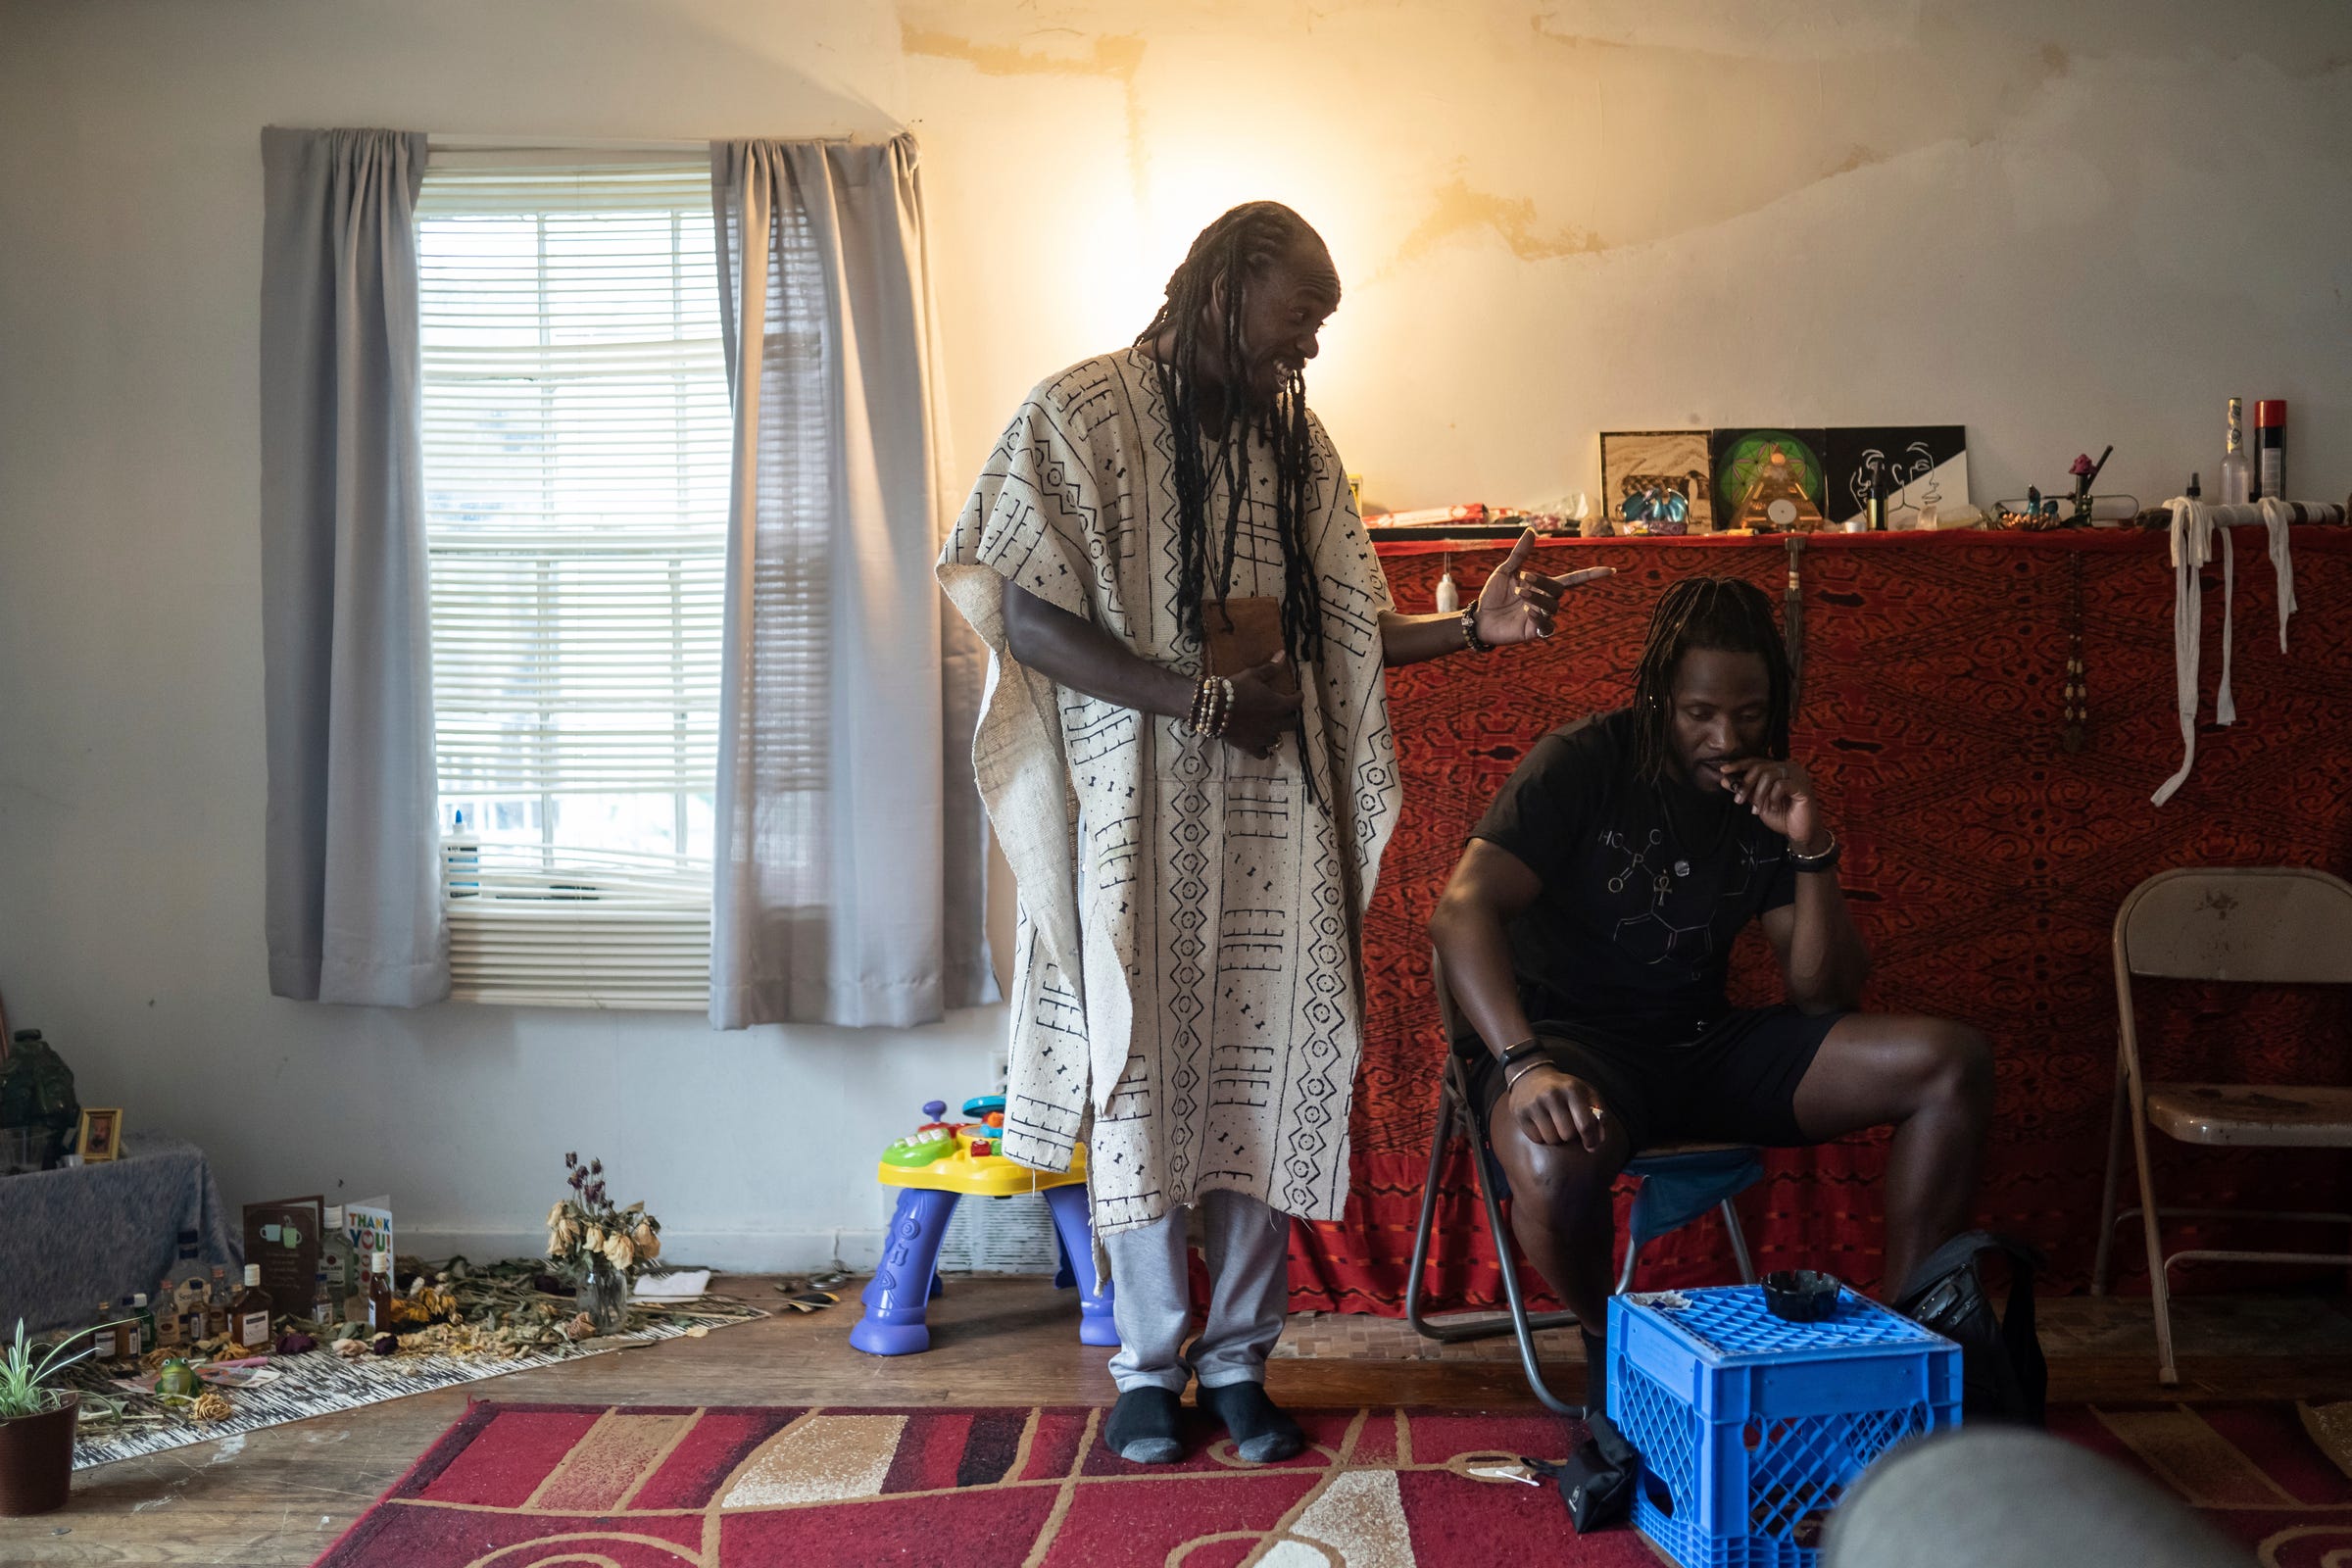 Sincere Seven, left, 43, of Detroit, talks with Brandon Parker, 42, of Detroit, as they smoke marijuana at the Psychonaut Academy of Detroit, located in an old house on the city's west side on Thursday, July 13, 2022.